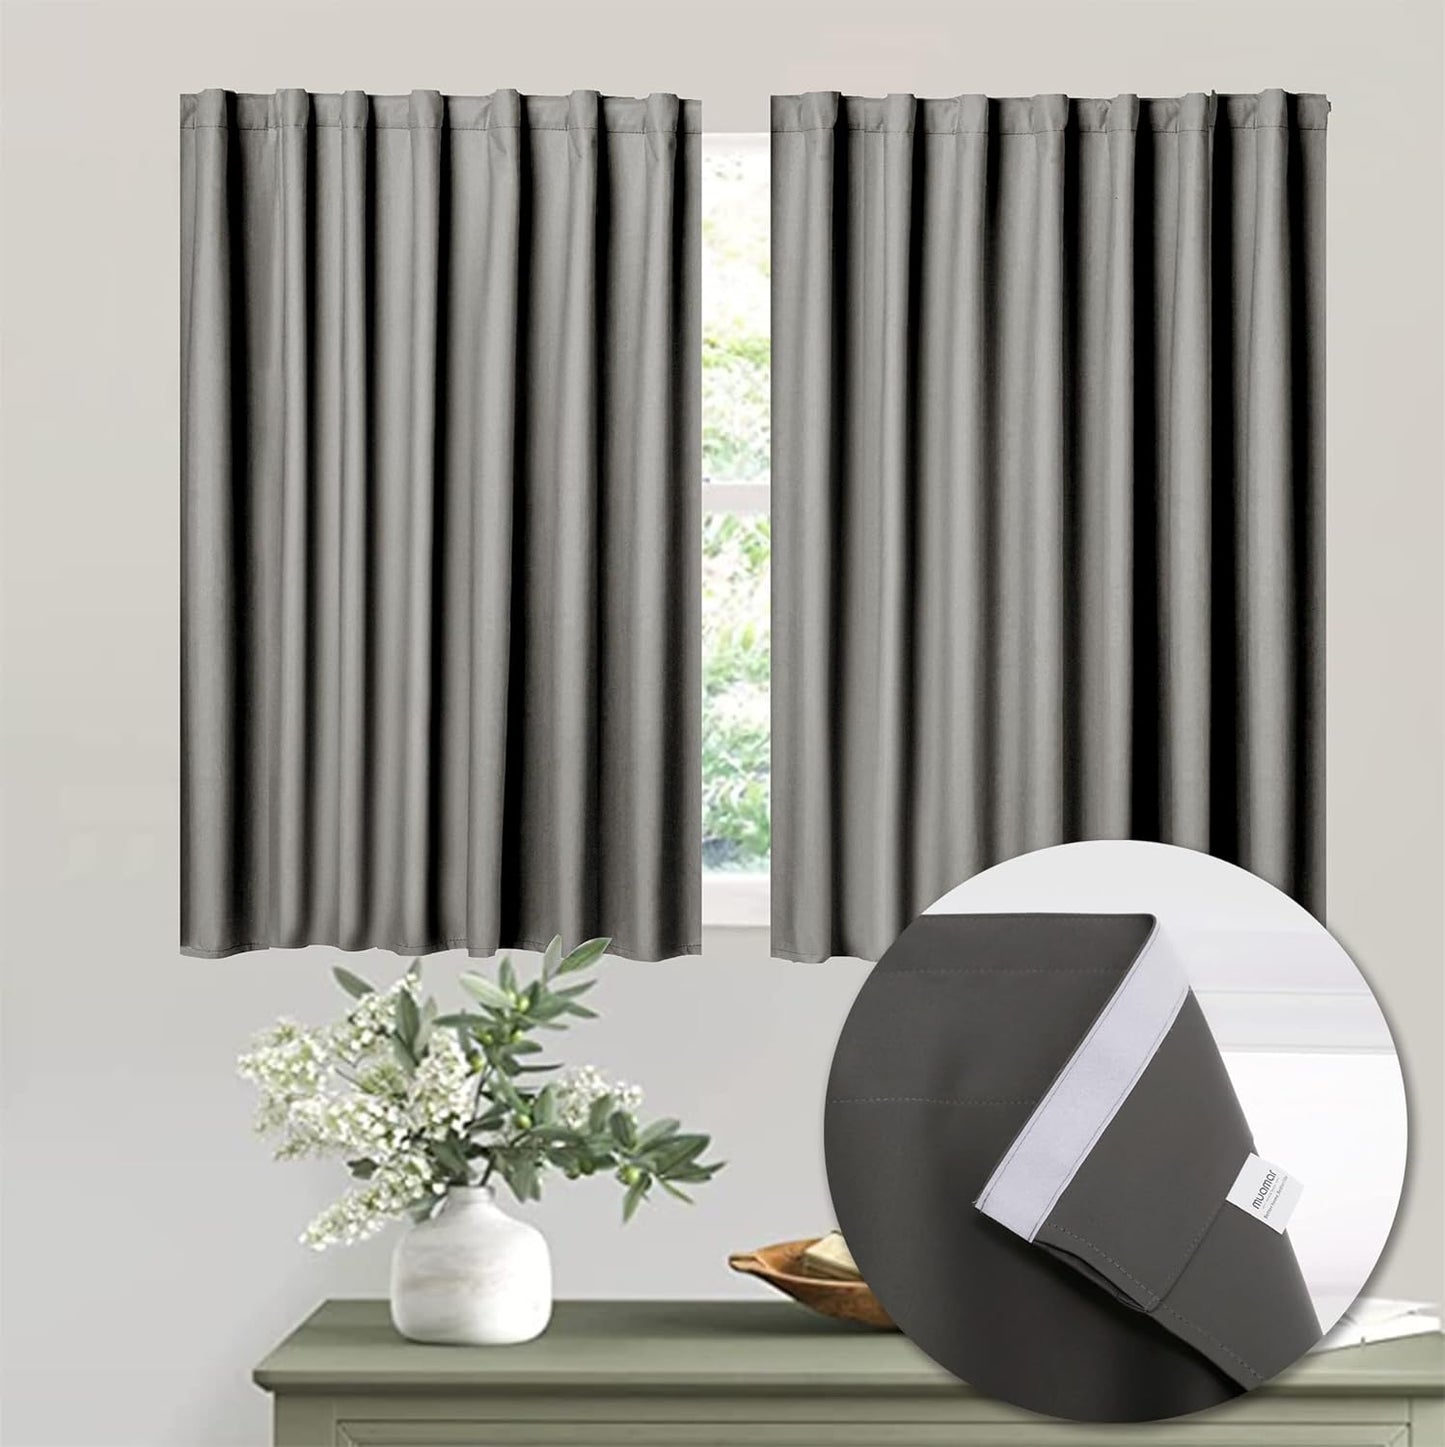 Muamar 2Pcs Blackout Curtains Privacy Curtains 63 Inch Length Window Curtains,Easy Install Thermal Insulated Window Shades,Stick Curtains No Rods, Black 42" W X 63" L  Muamar Grey 29"W X 36"L 